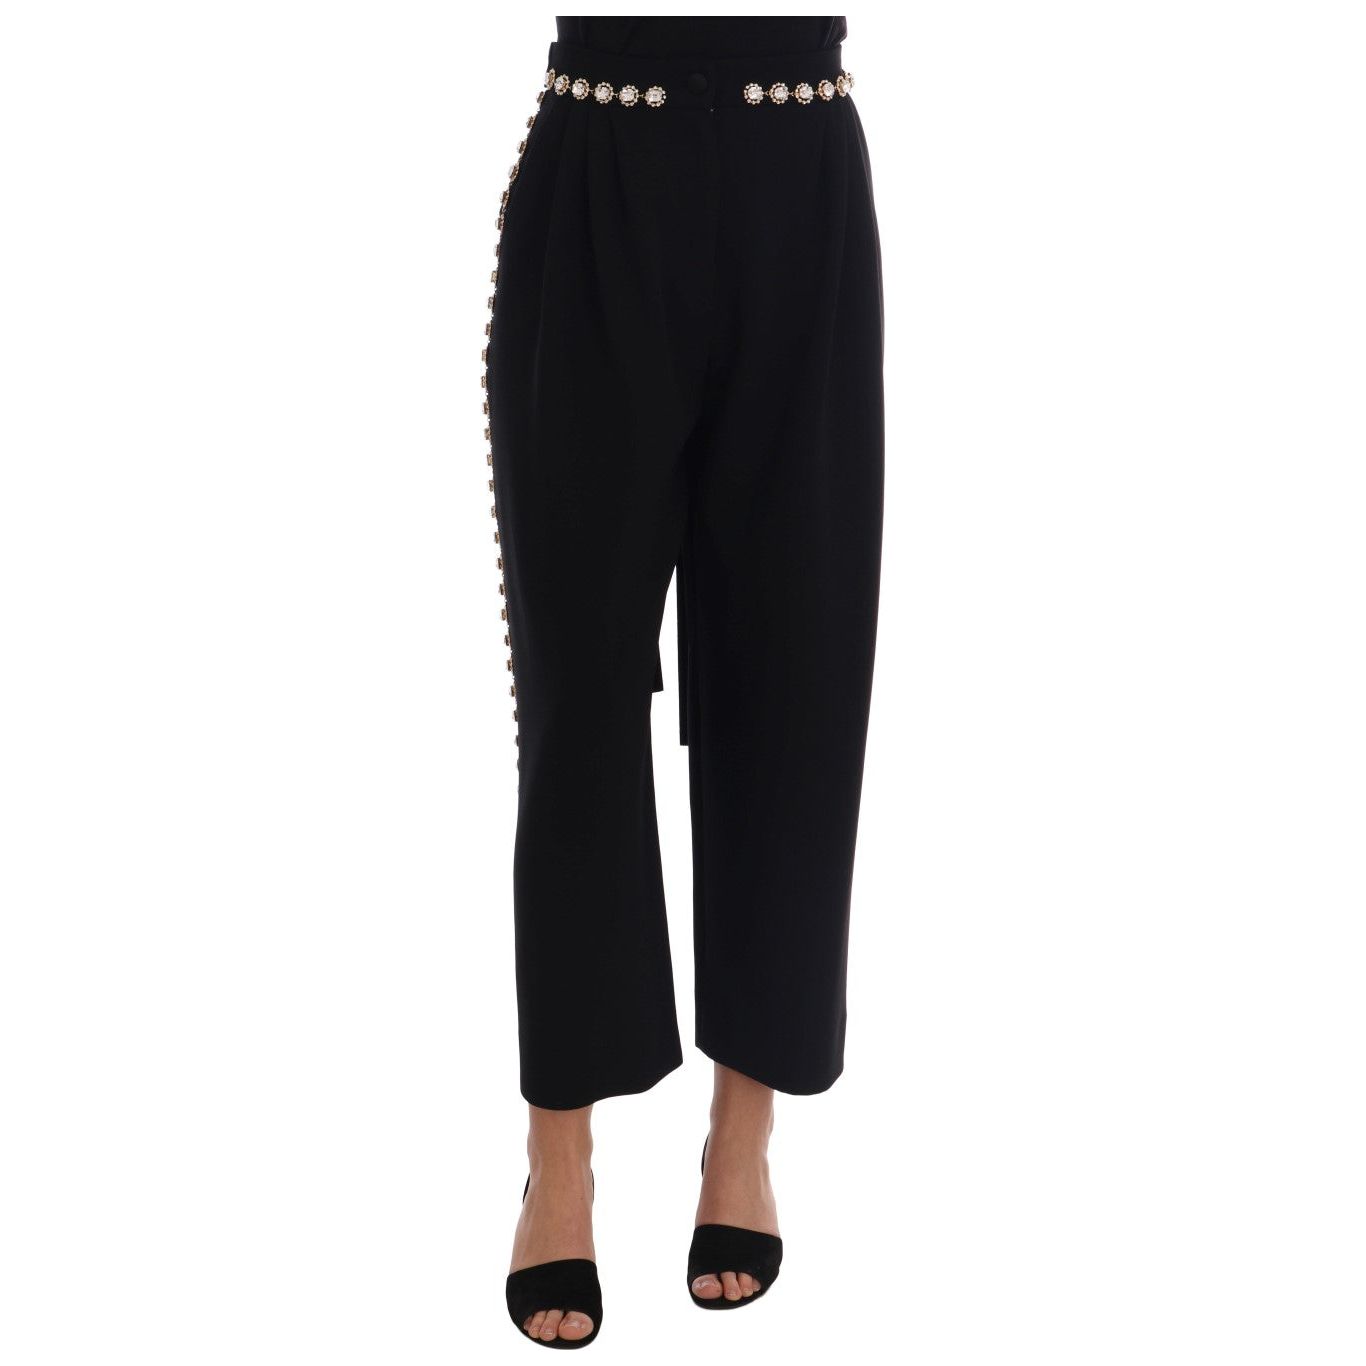 Dolce & Gabbana Elegant High-Waist Ankle Pants with Gold Detailing black-wool-stretch-crystal-pants Jeans & Pants 513120-black-wool-stretch-crystal-pants.jpg